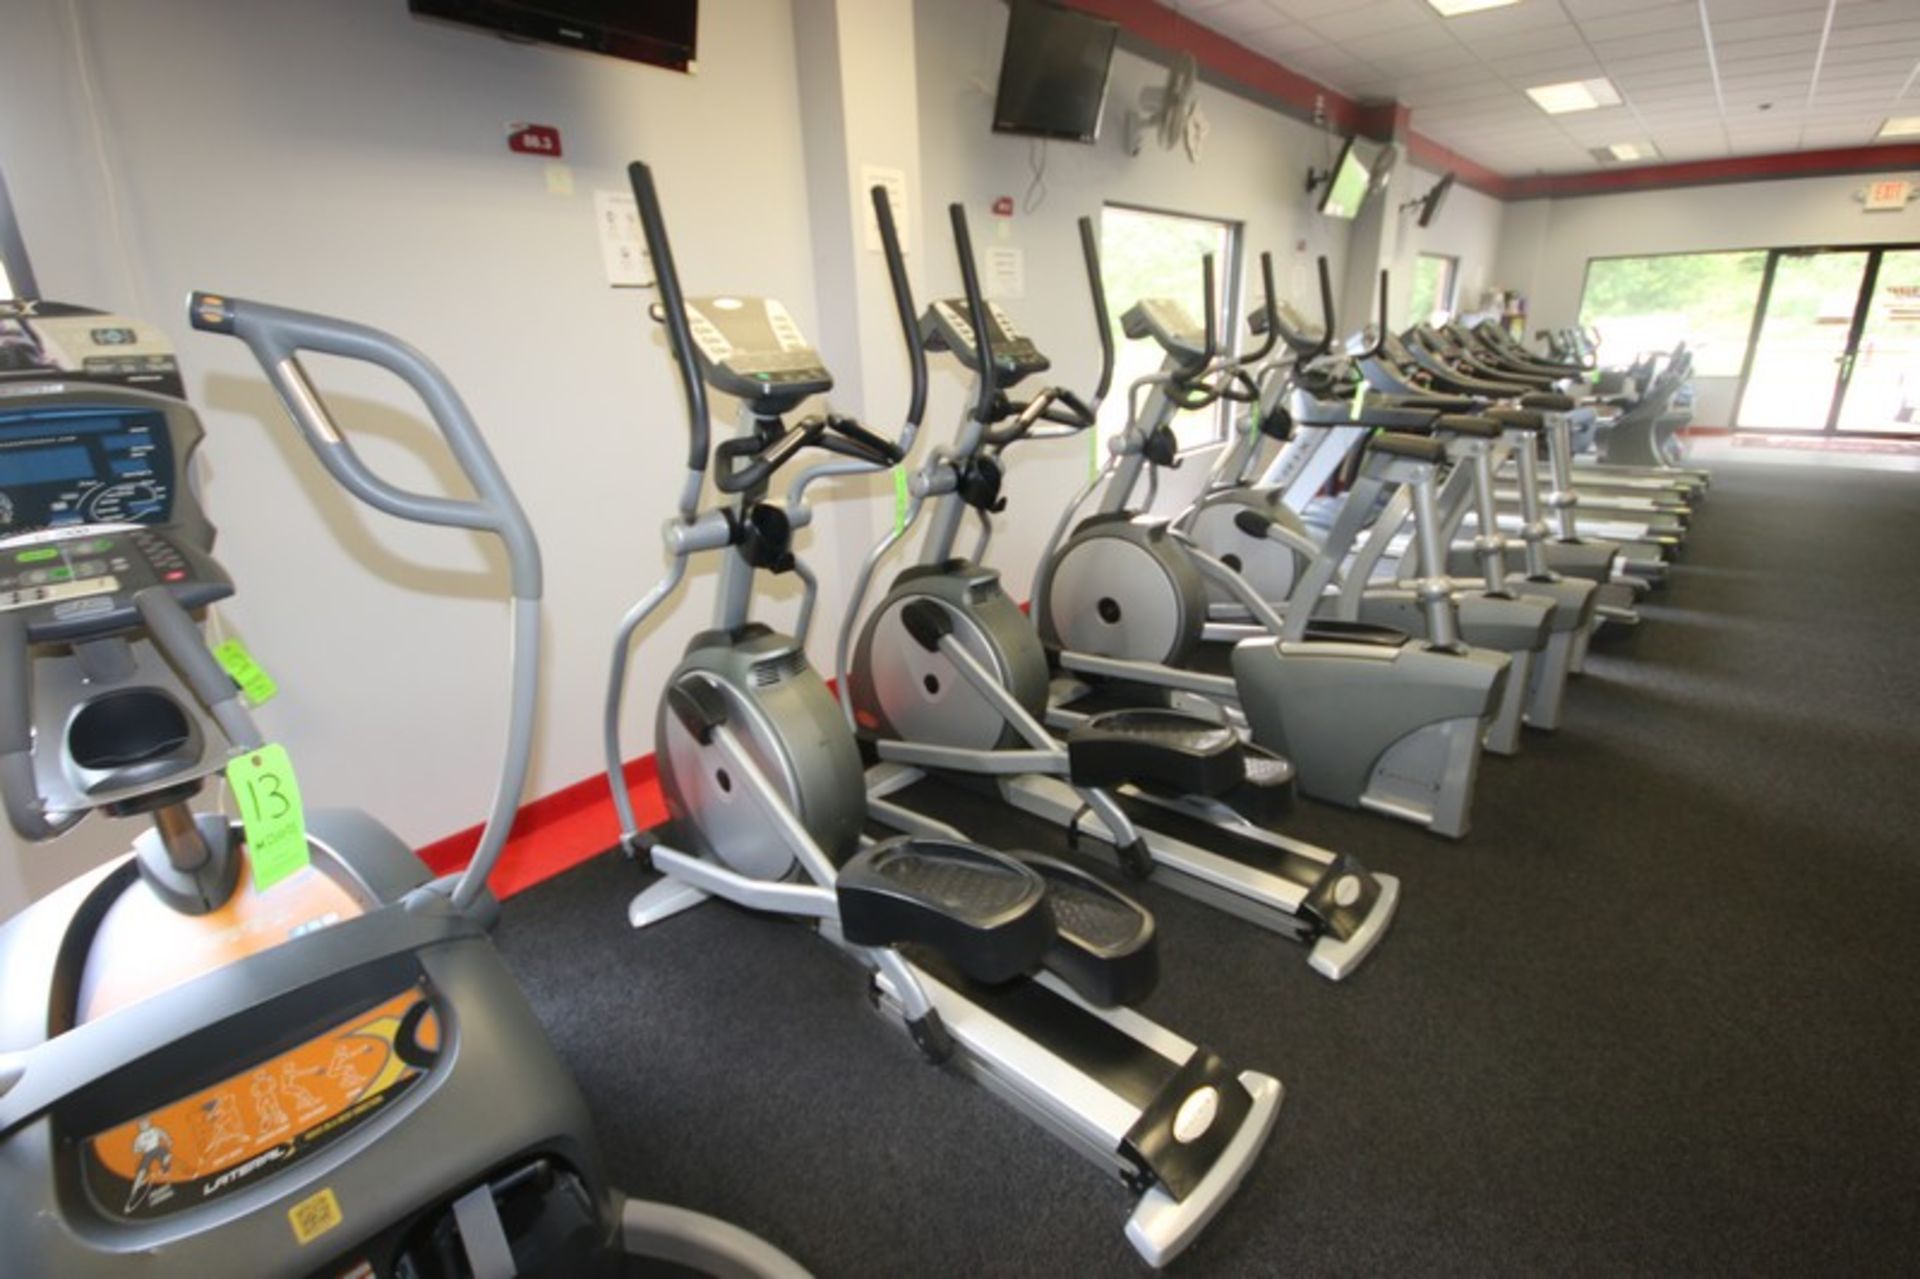 Matrix Elliptical, Overall Dims.: Aprox. 75" L x 31" W x 72" H (LOCATED @ 2800 GOLDEN MILE HWY,